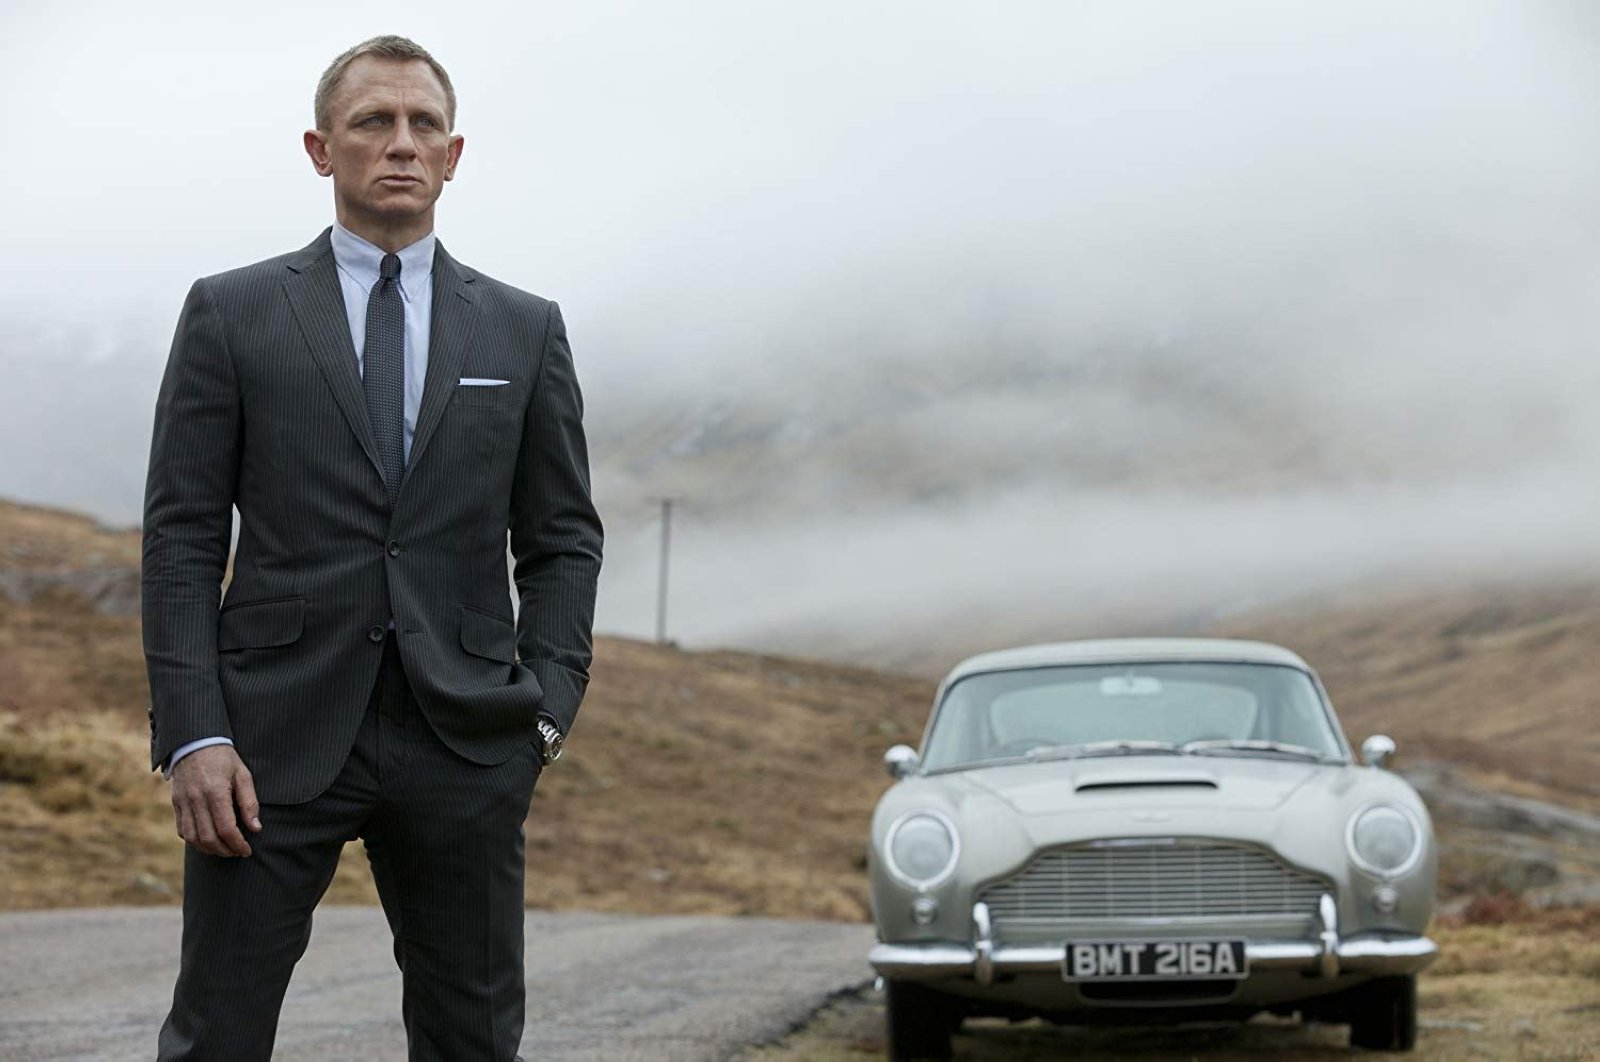 James Bond film "No Time to Die" is one of the big-budget movies whose release has been canceled due to the coronavirus. 